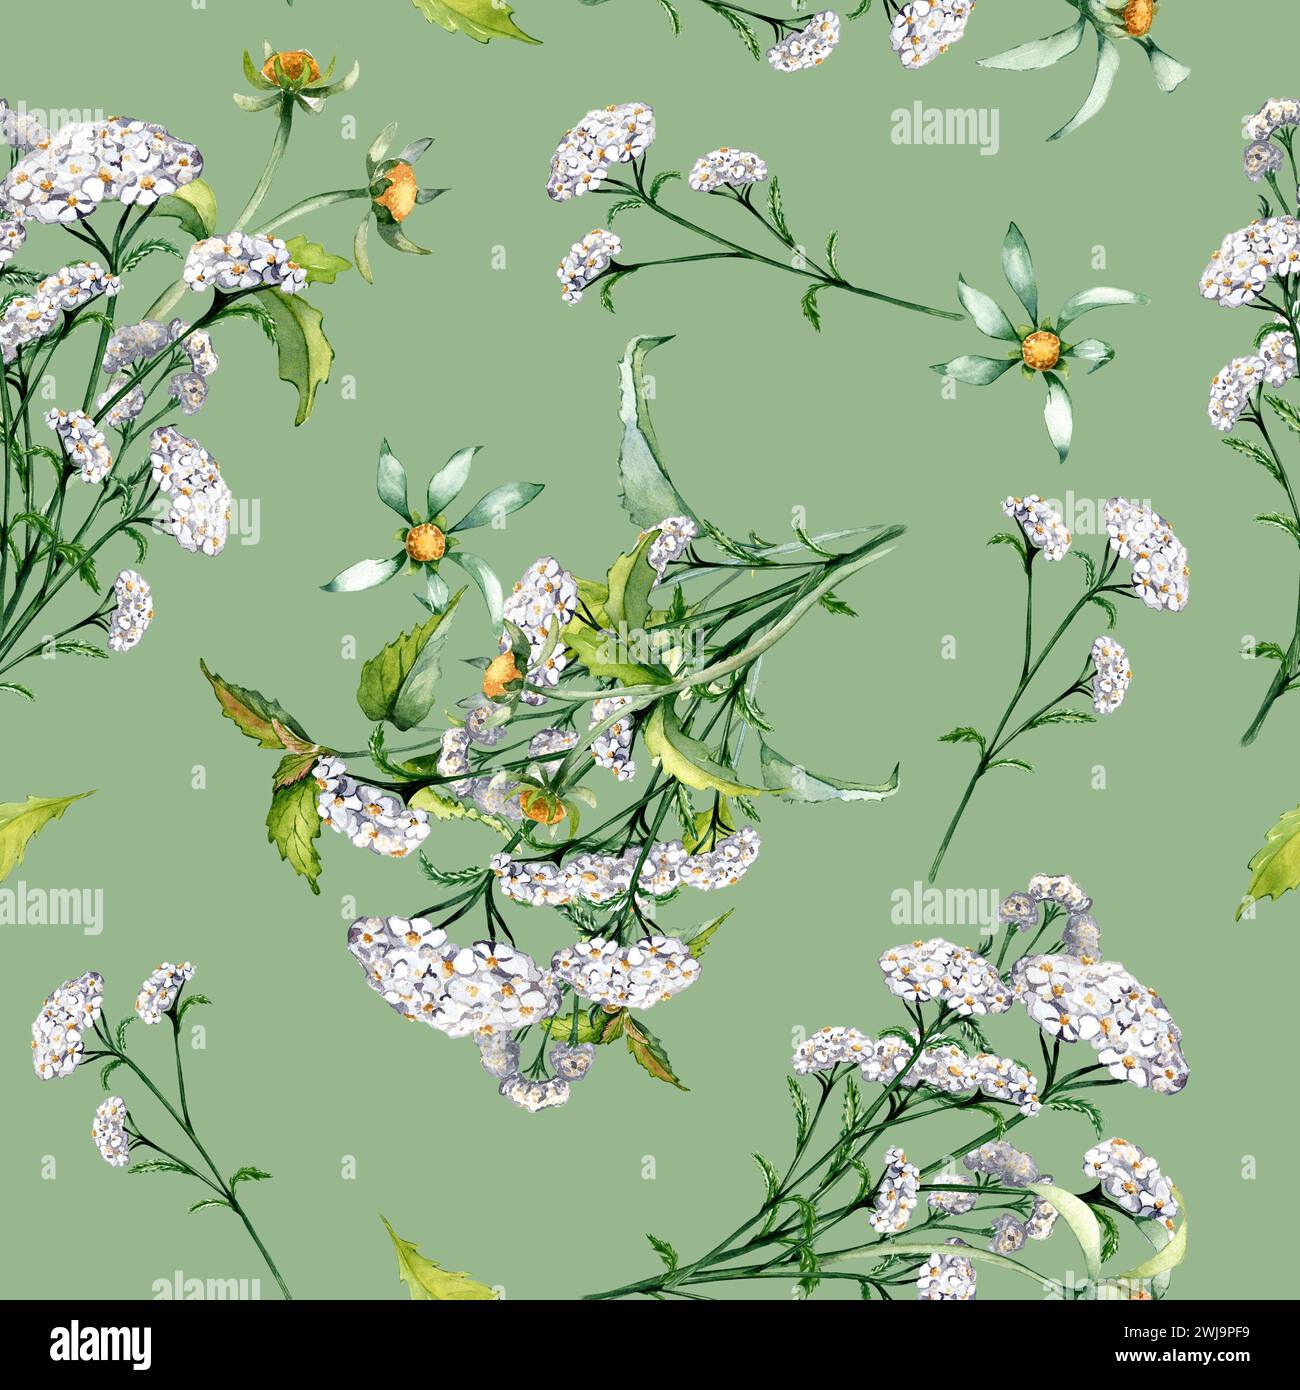 Achillea yarrow, nettle, bidens beggarticks watercolor seamless pattern isolated on green. Medicinal flowers painted. Useful herbs, medicinal plants h Stock Photo